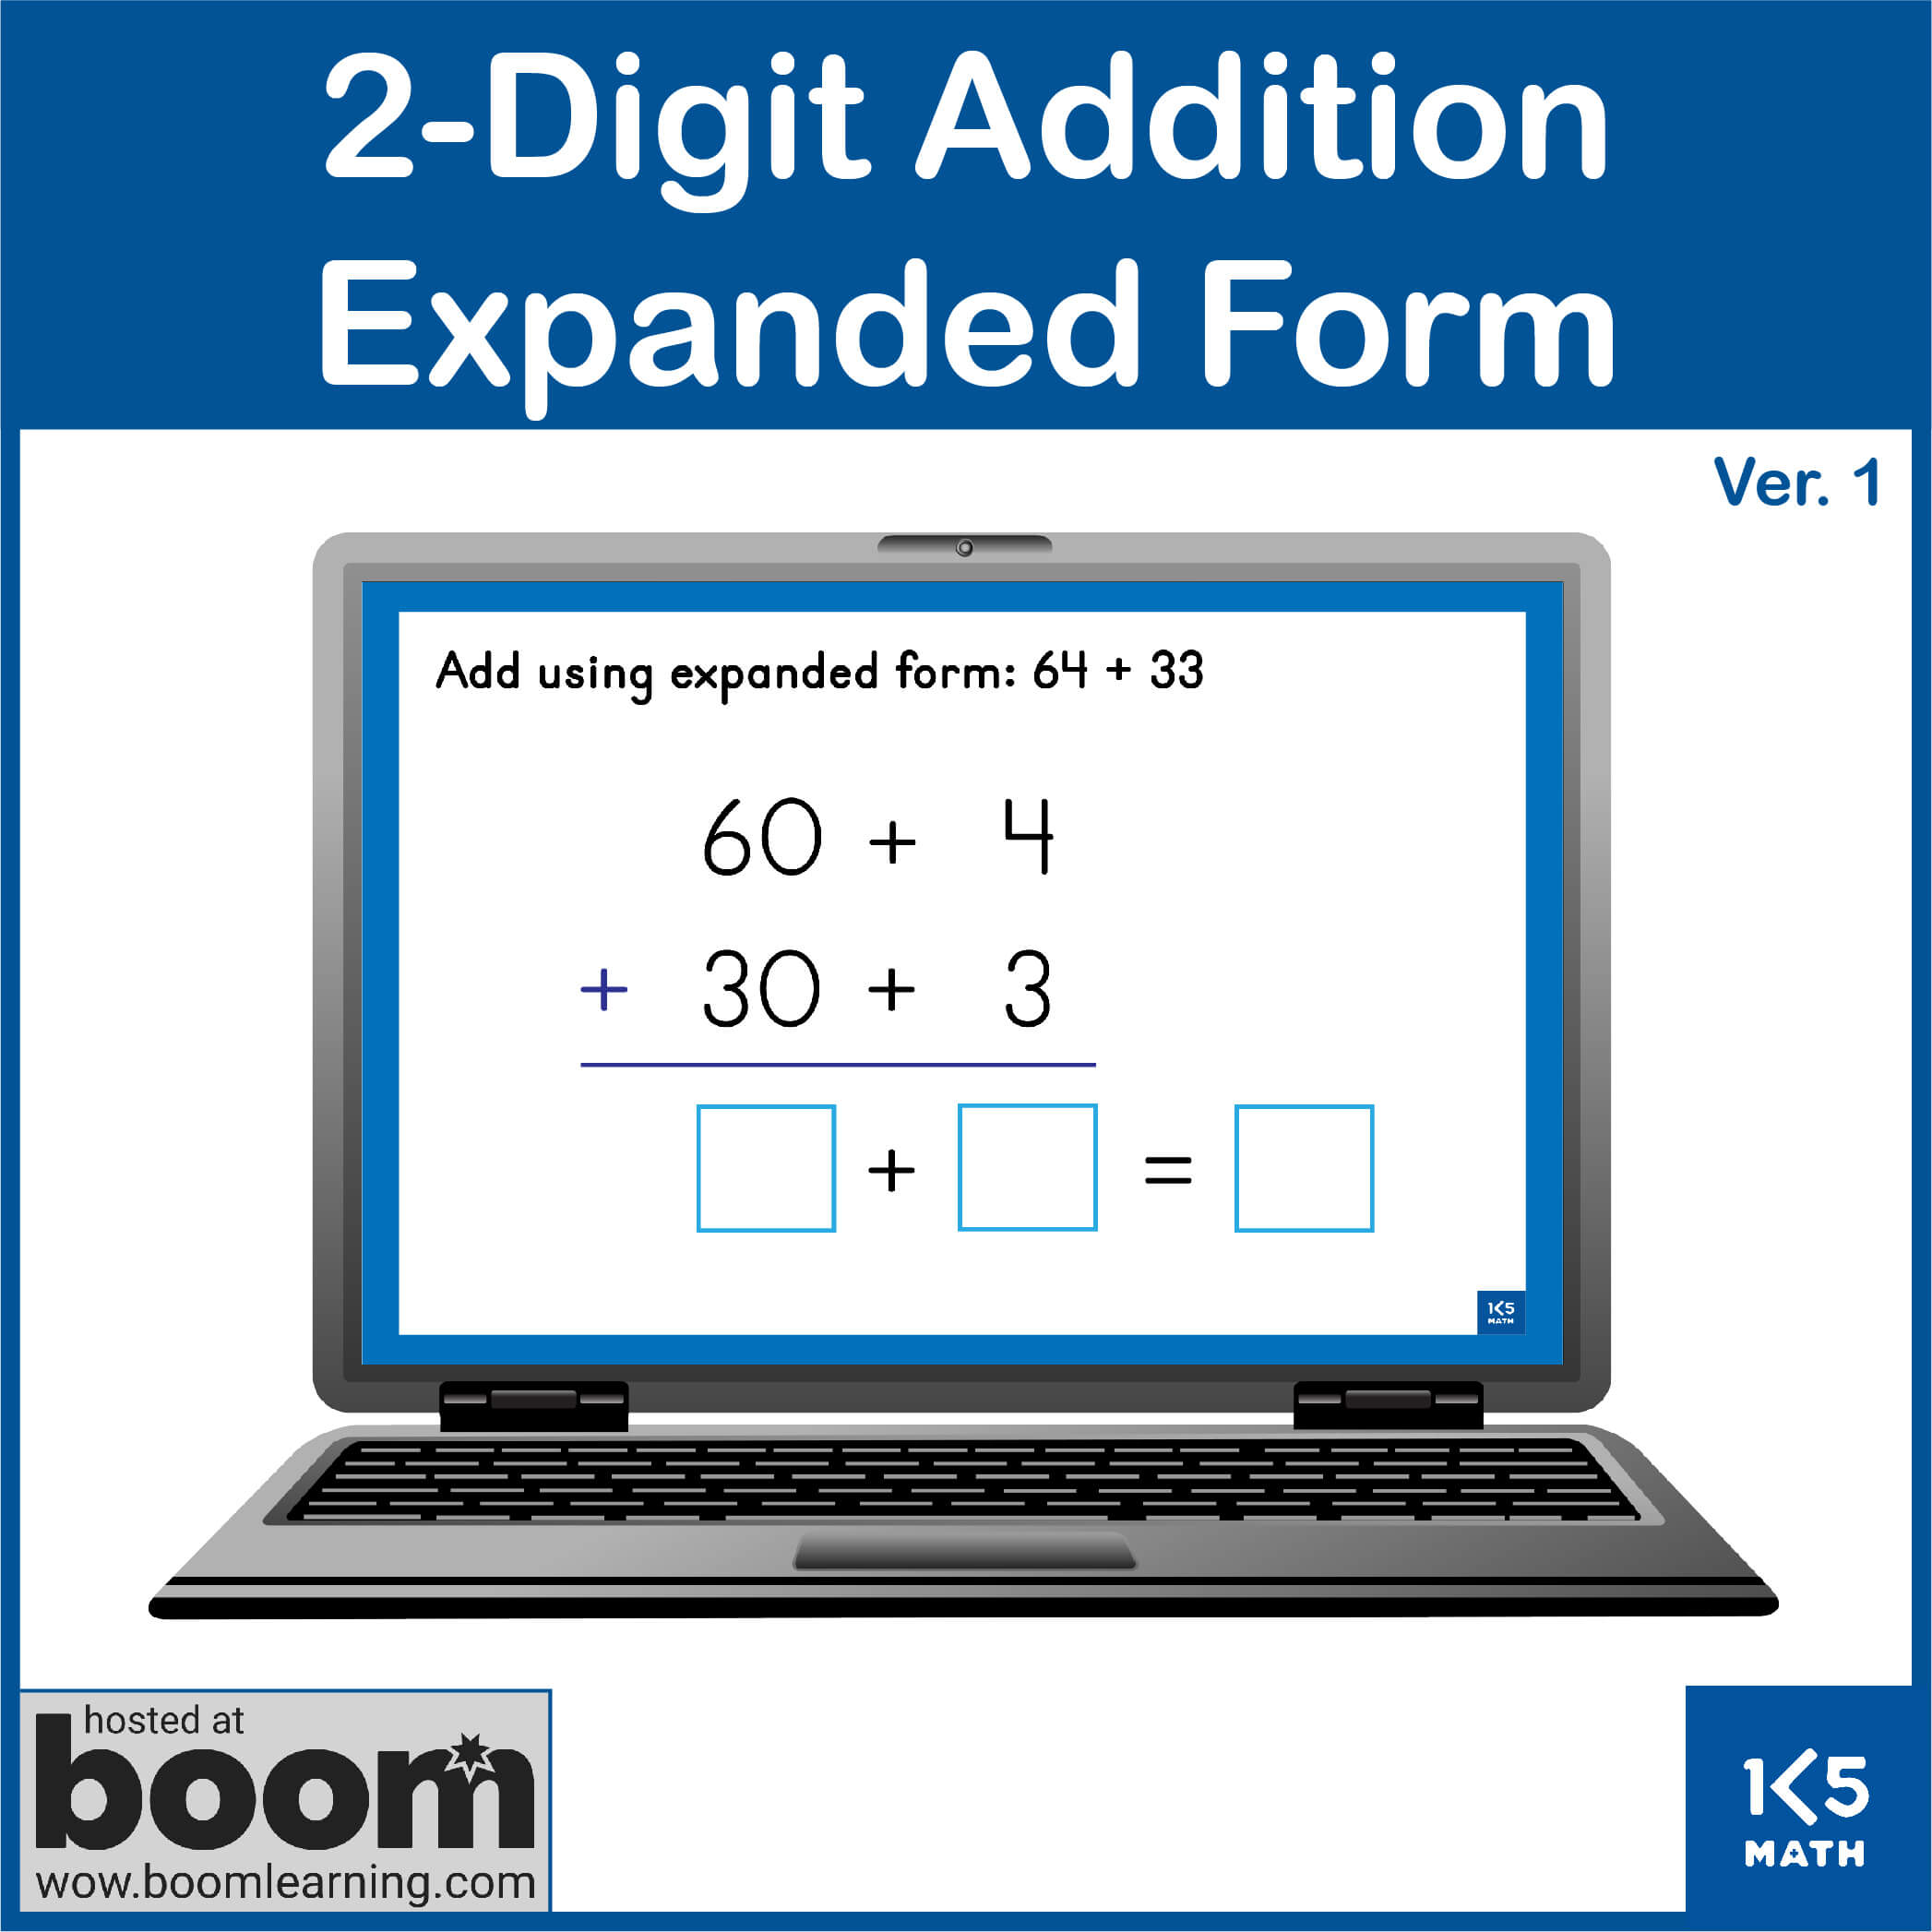 Boom Cards: 2-Digit Addition Expanded Form (no regrouping)